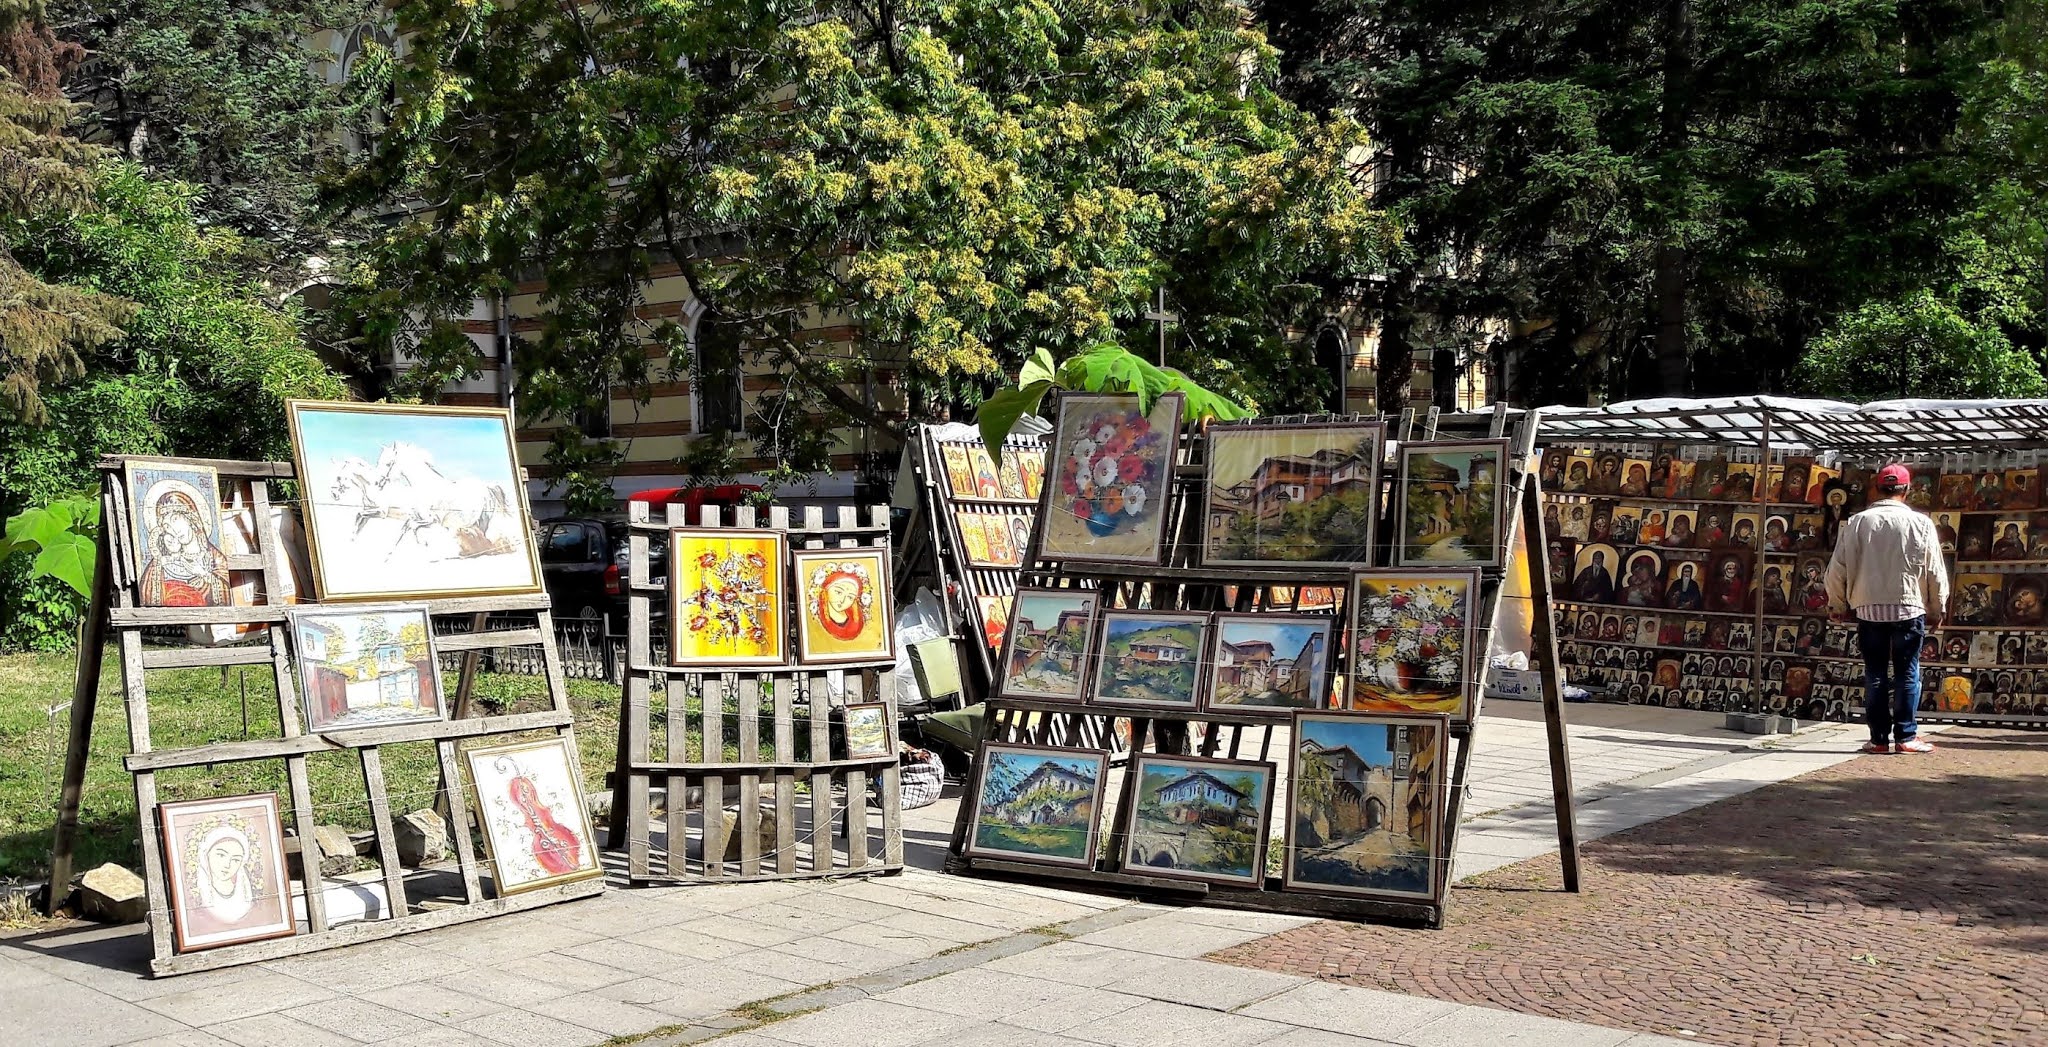 A stall full of religious icons on the pavement in Alexander Nevsky Square